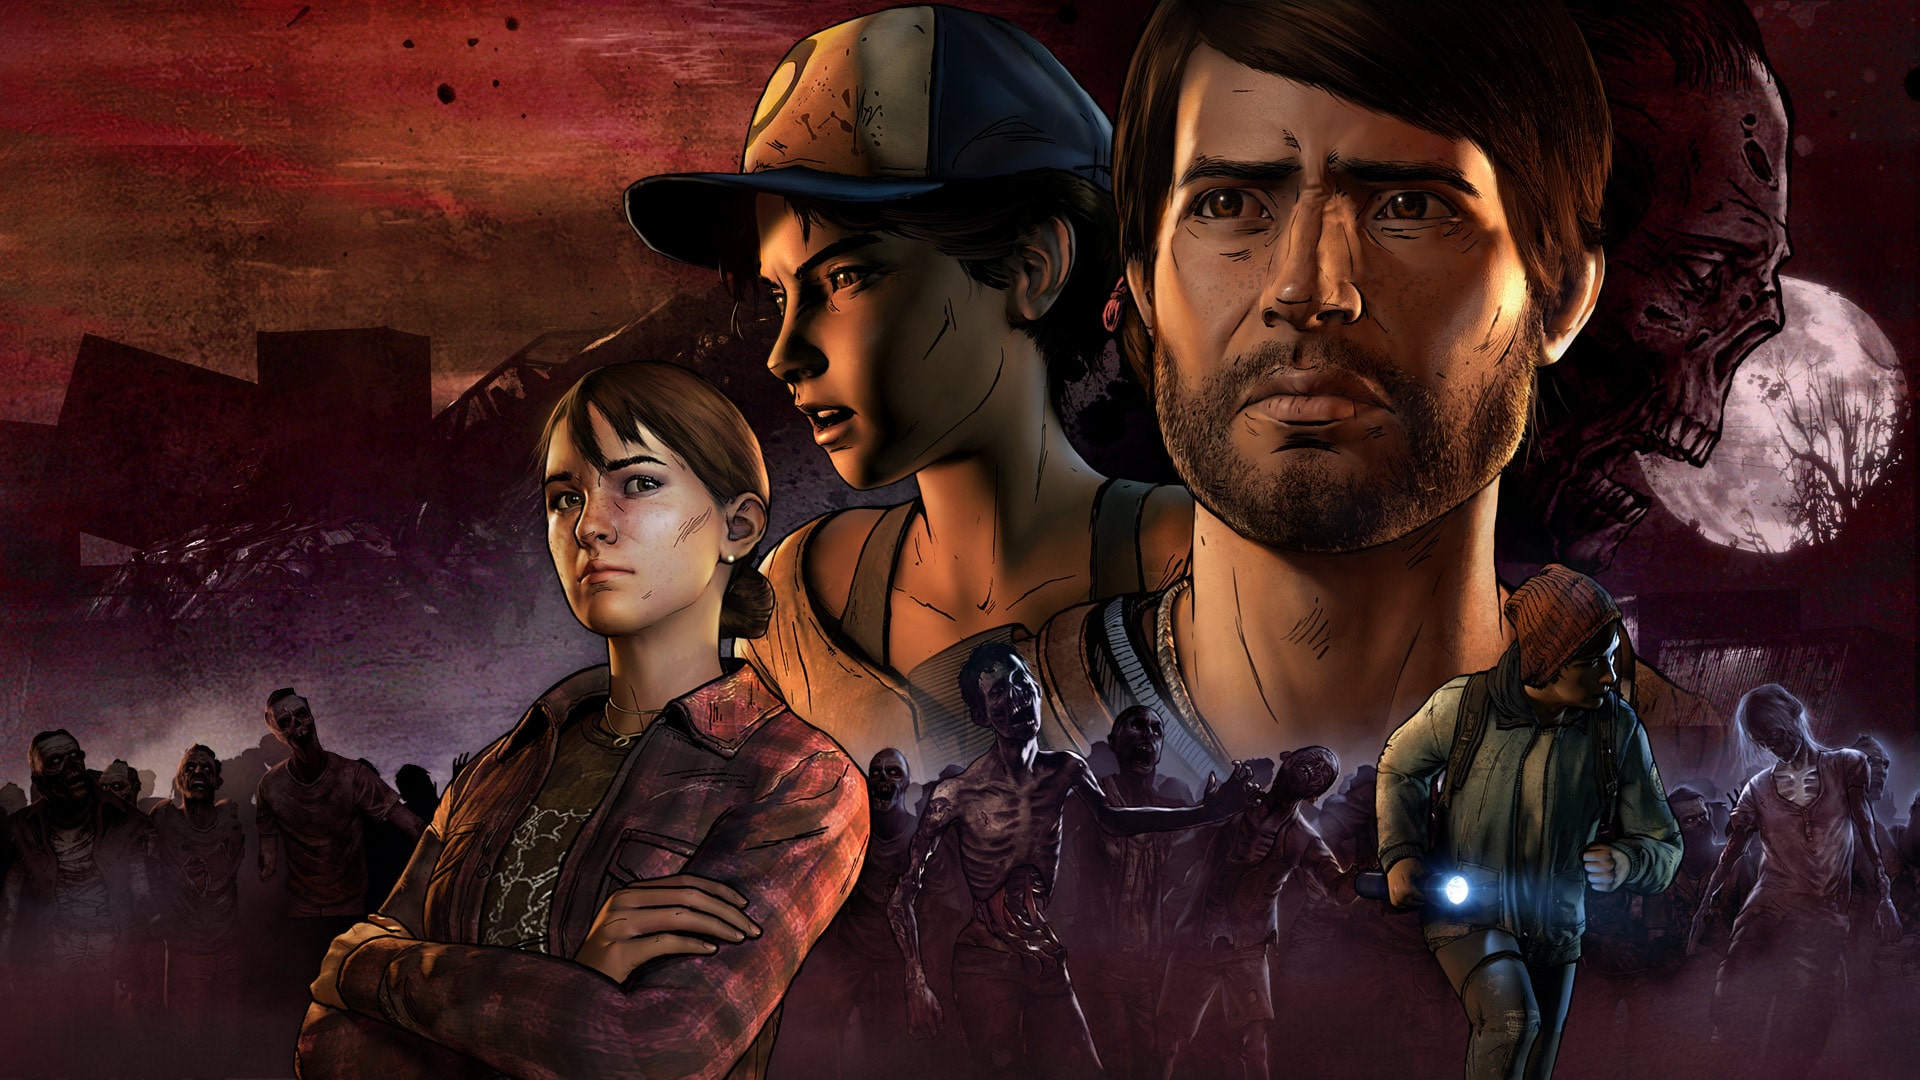 the walking dead a new frontier episode release dates